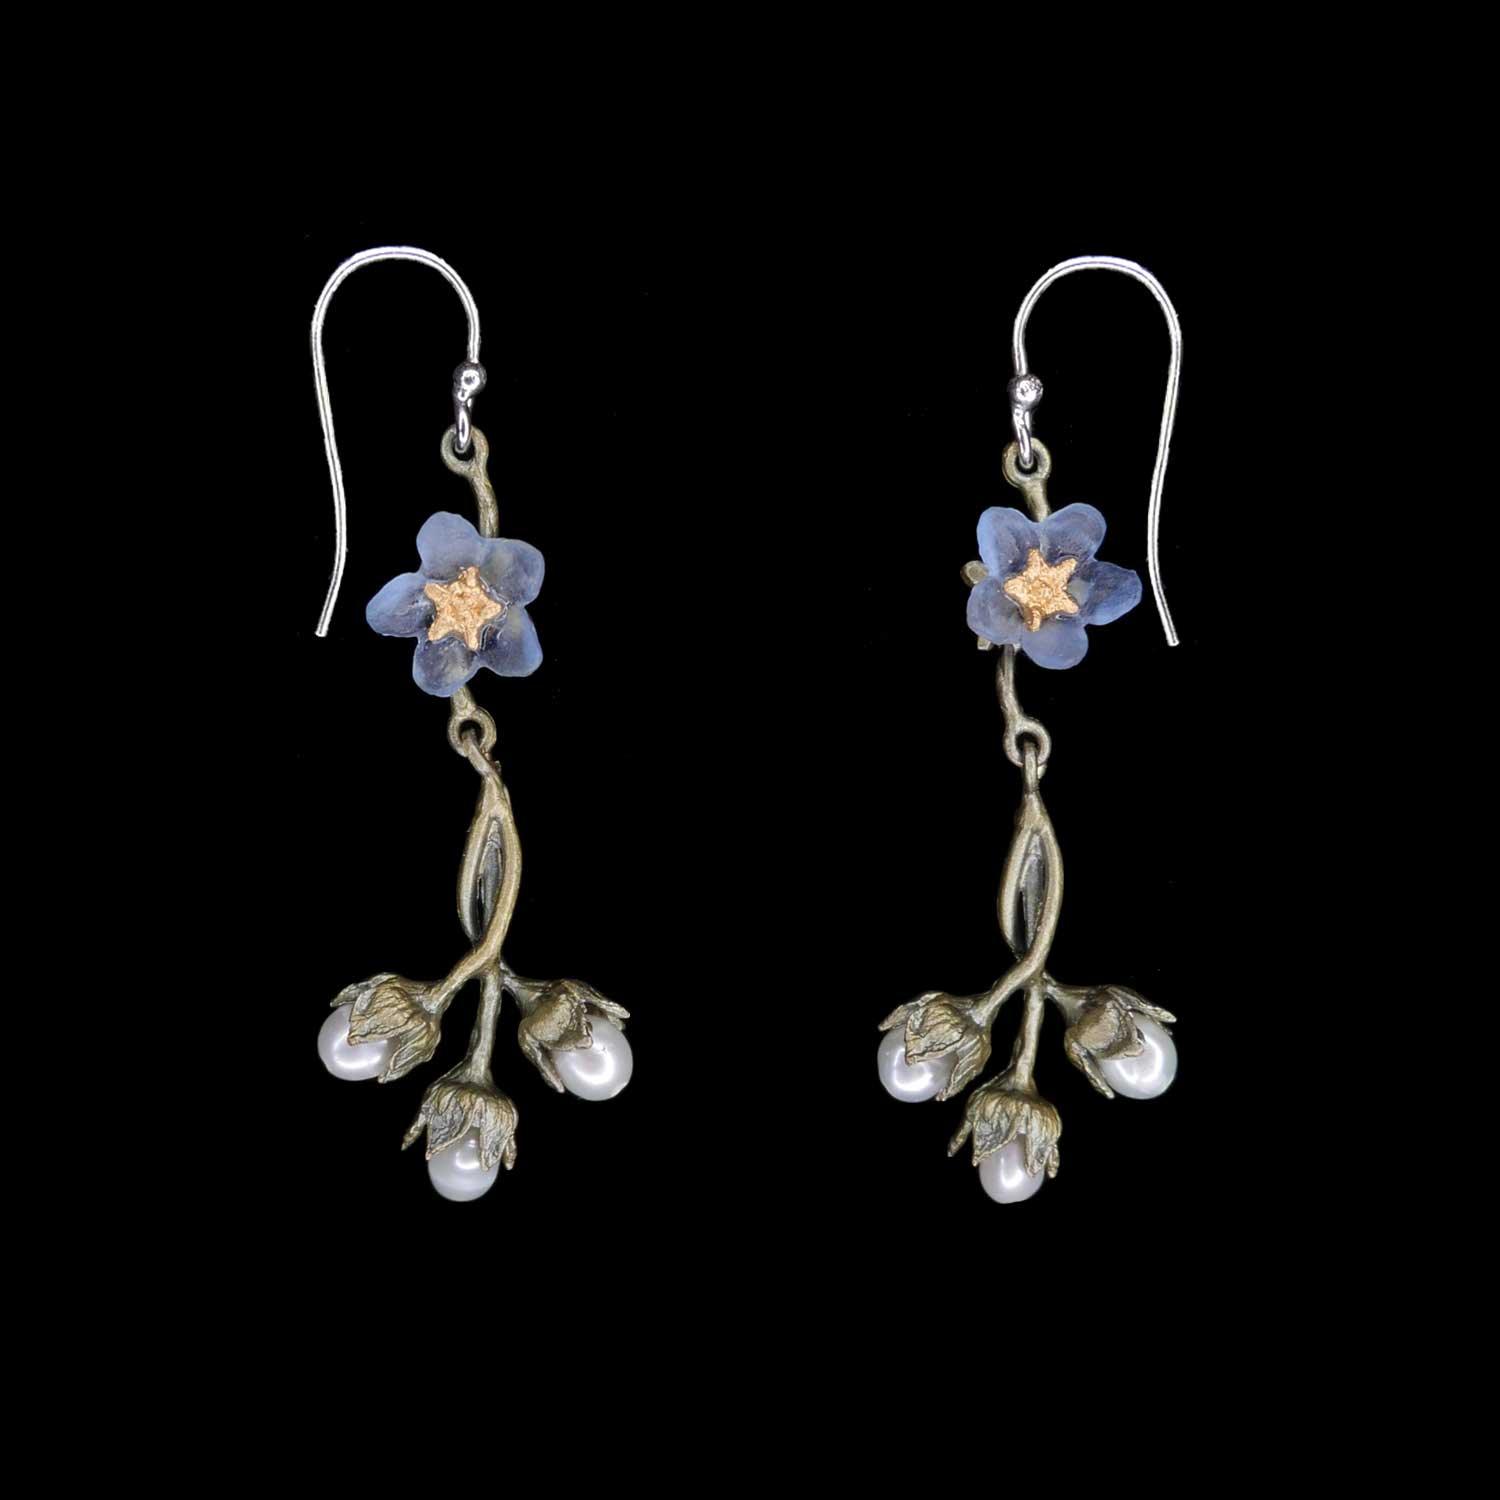 Forget Me Not Earrings - Wire - Michael Michaud Jewellery